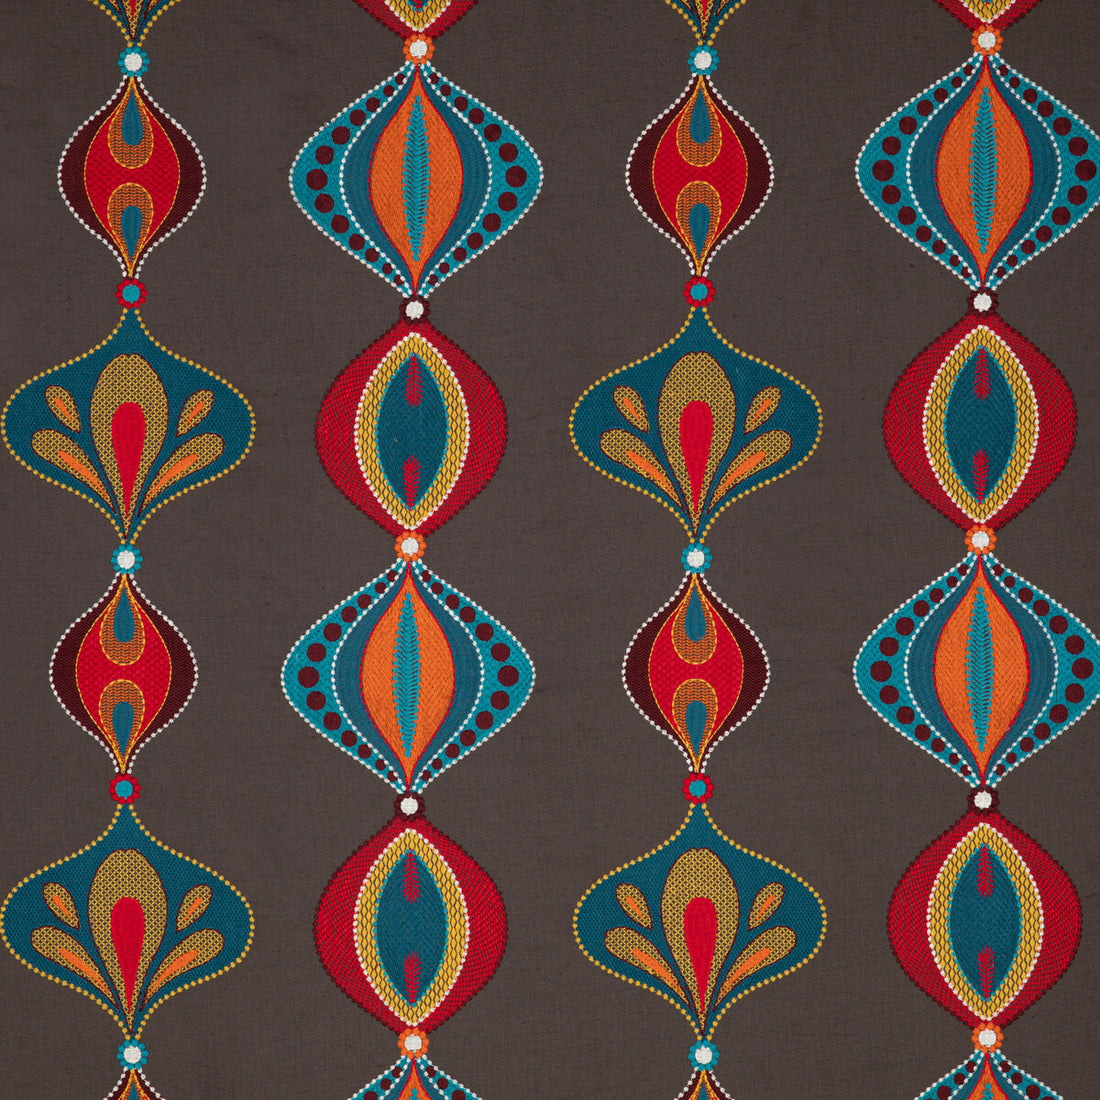 Viva fabric in teal/spice color - pattern PF50471.1.0 - by Baker Lifestyle in the Fiesta collection